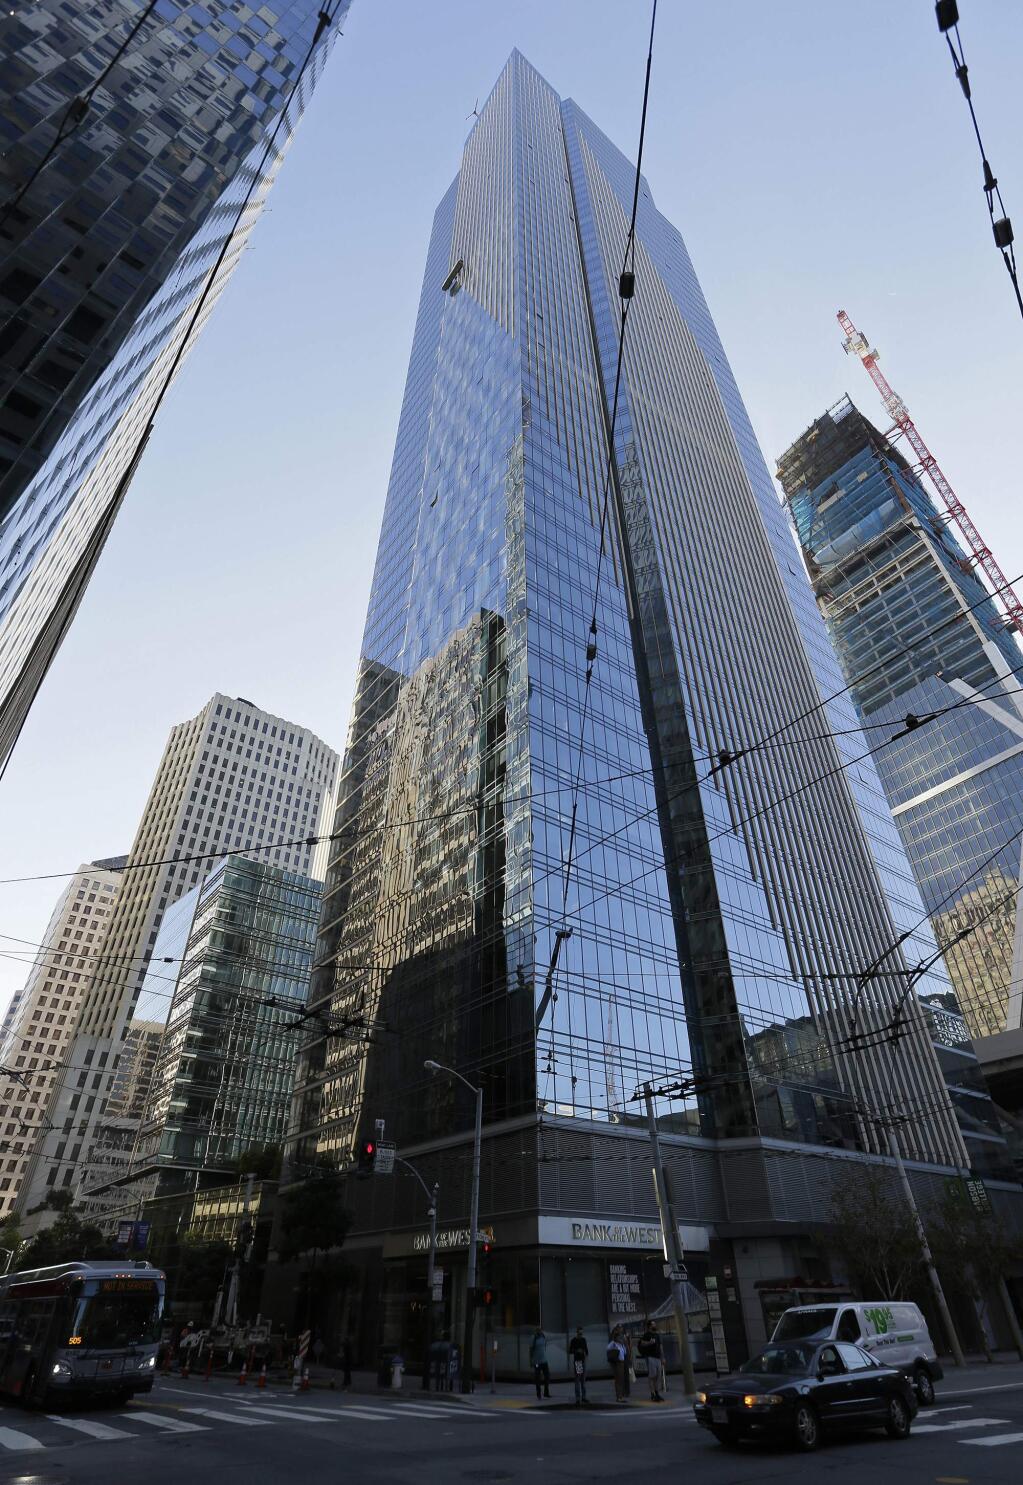 FILE - In this Sept. 26, 2016 file photo, is the Millennium Tower in San Francisco. (AP Photo/Eric Risberg, File)